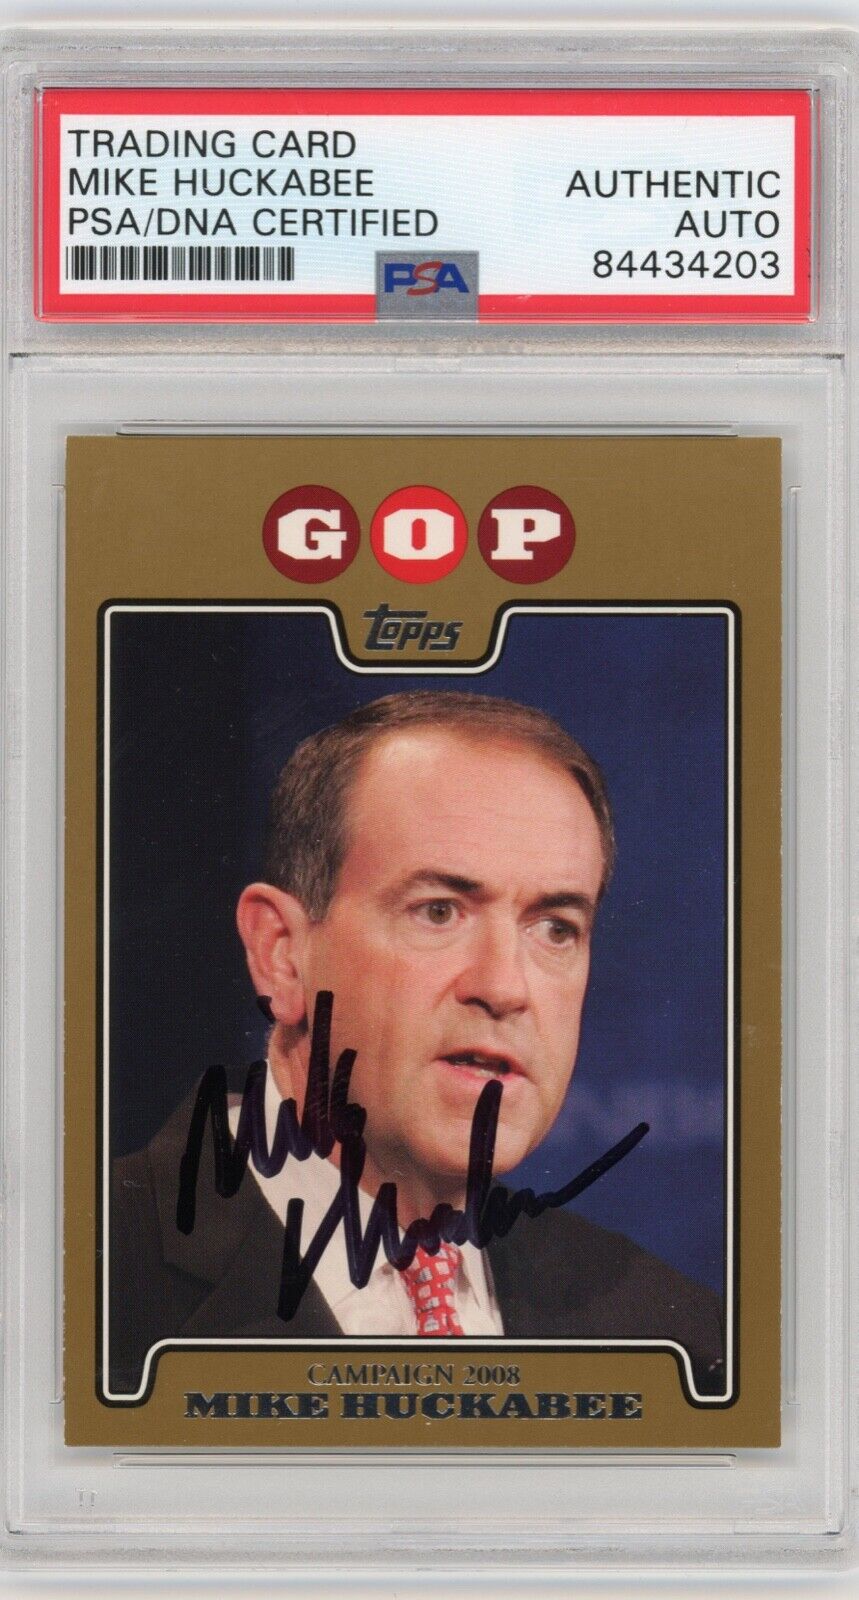 Mike Huckabee 2008 Topps GOLD PSA COA Signed Autographed Campaign GOP Card